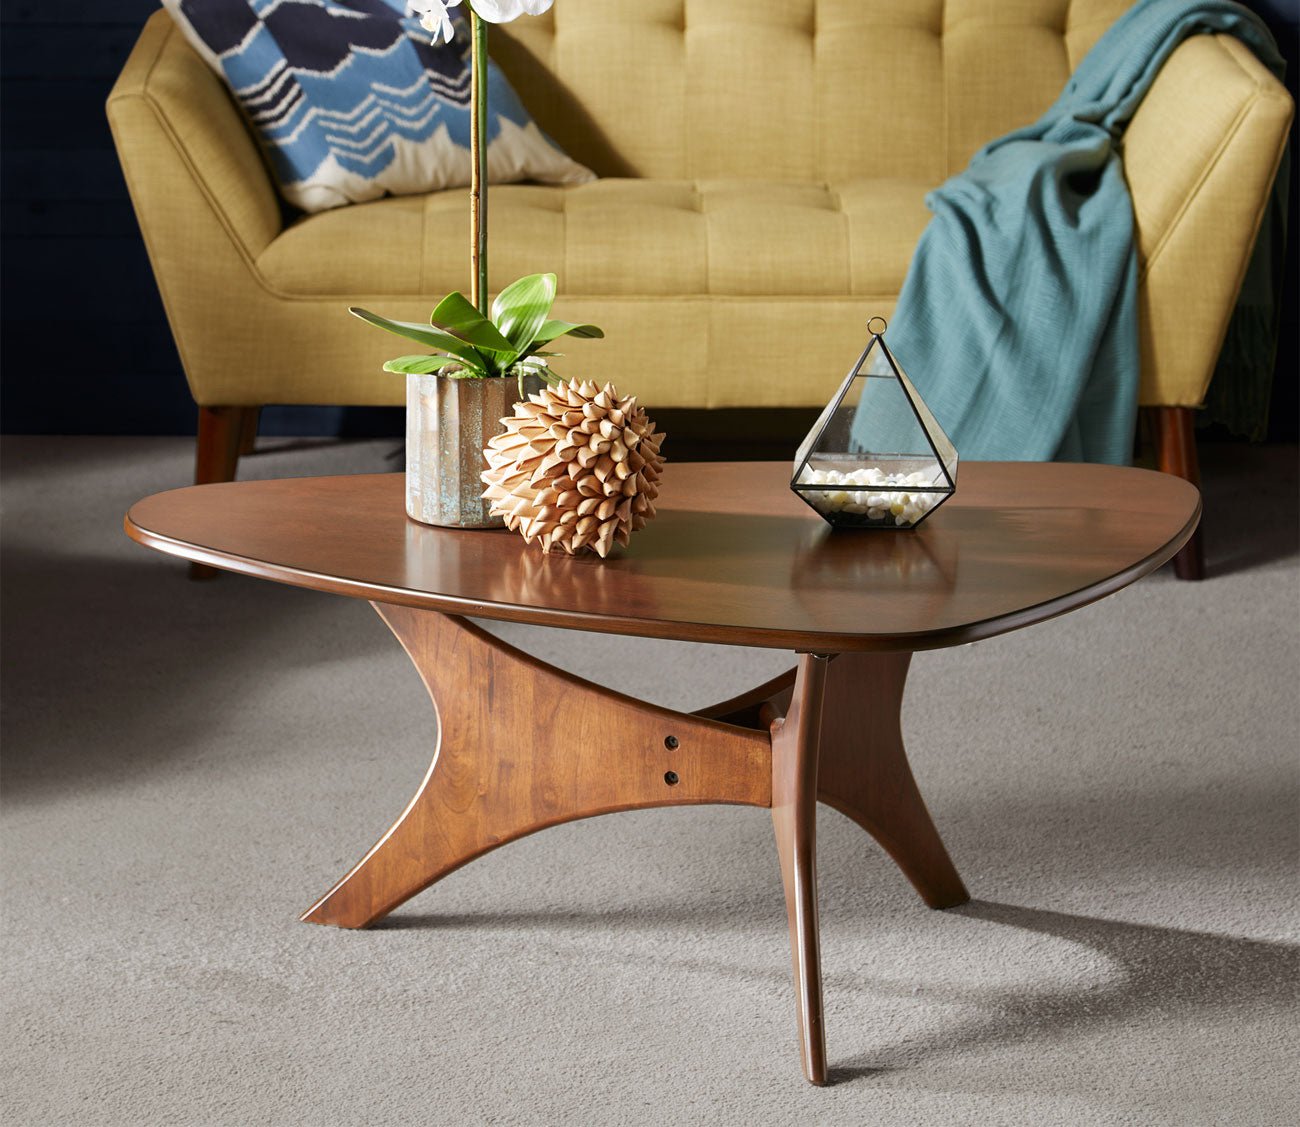 Blaze Triangle Wood Coffee Table by INK + IVY